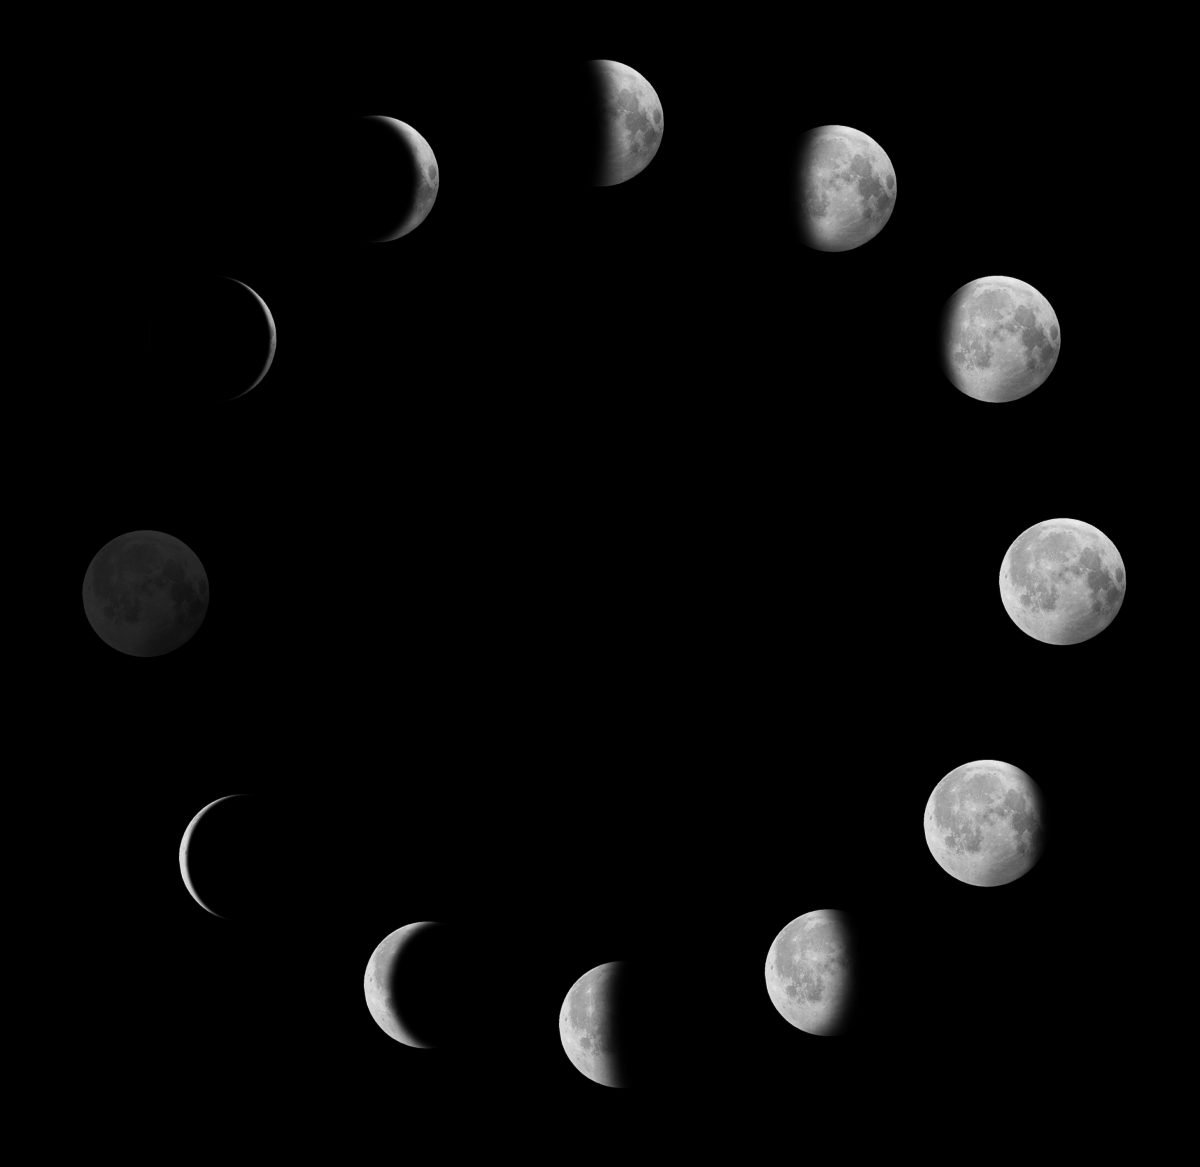 Lunar Alchemy: The Cycles of the Moon with Kathy Haridev Latham